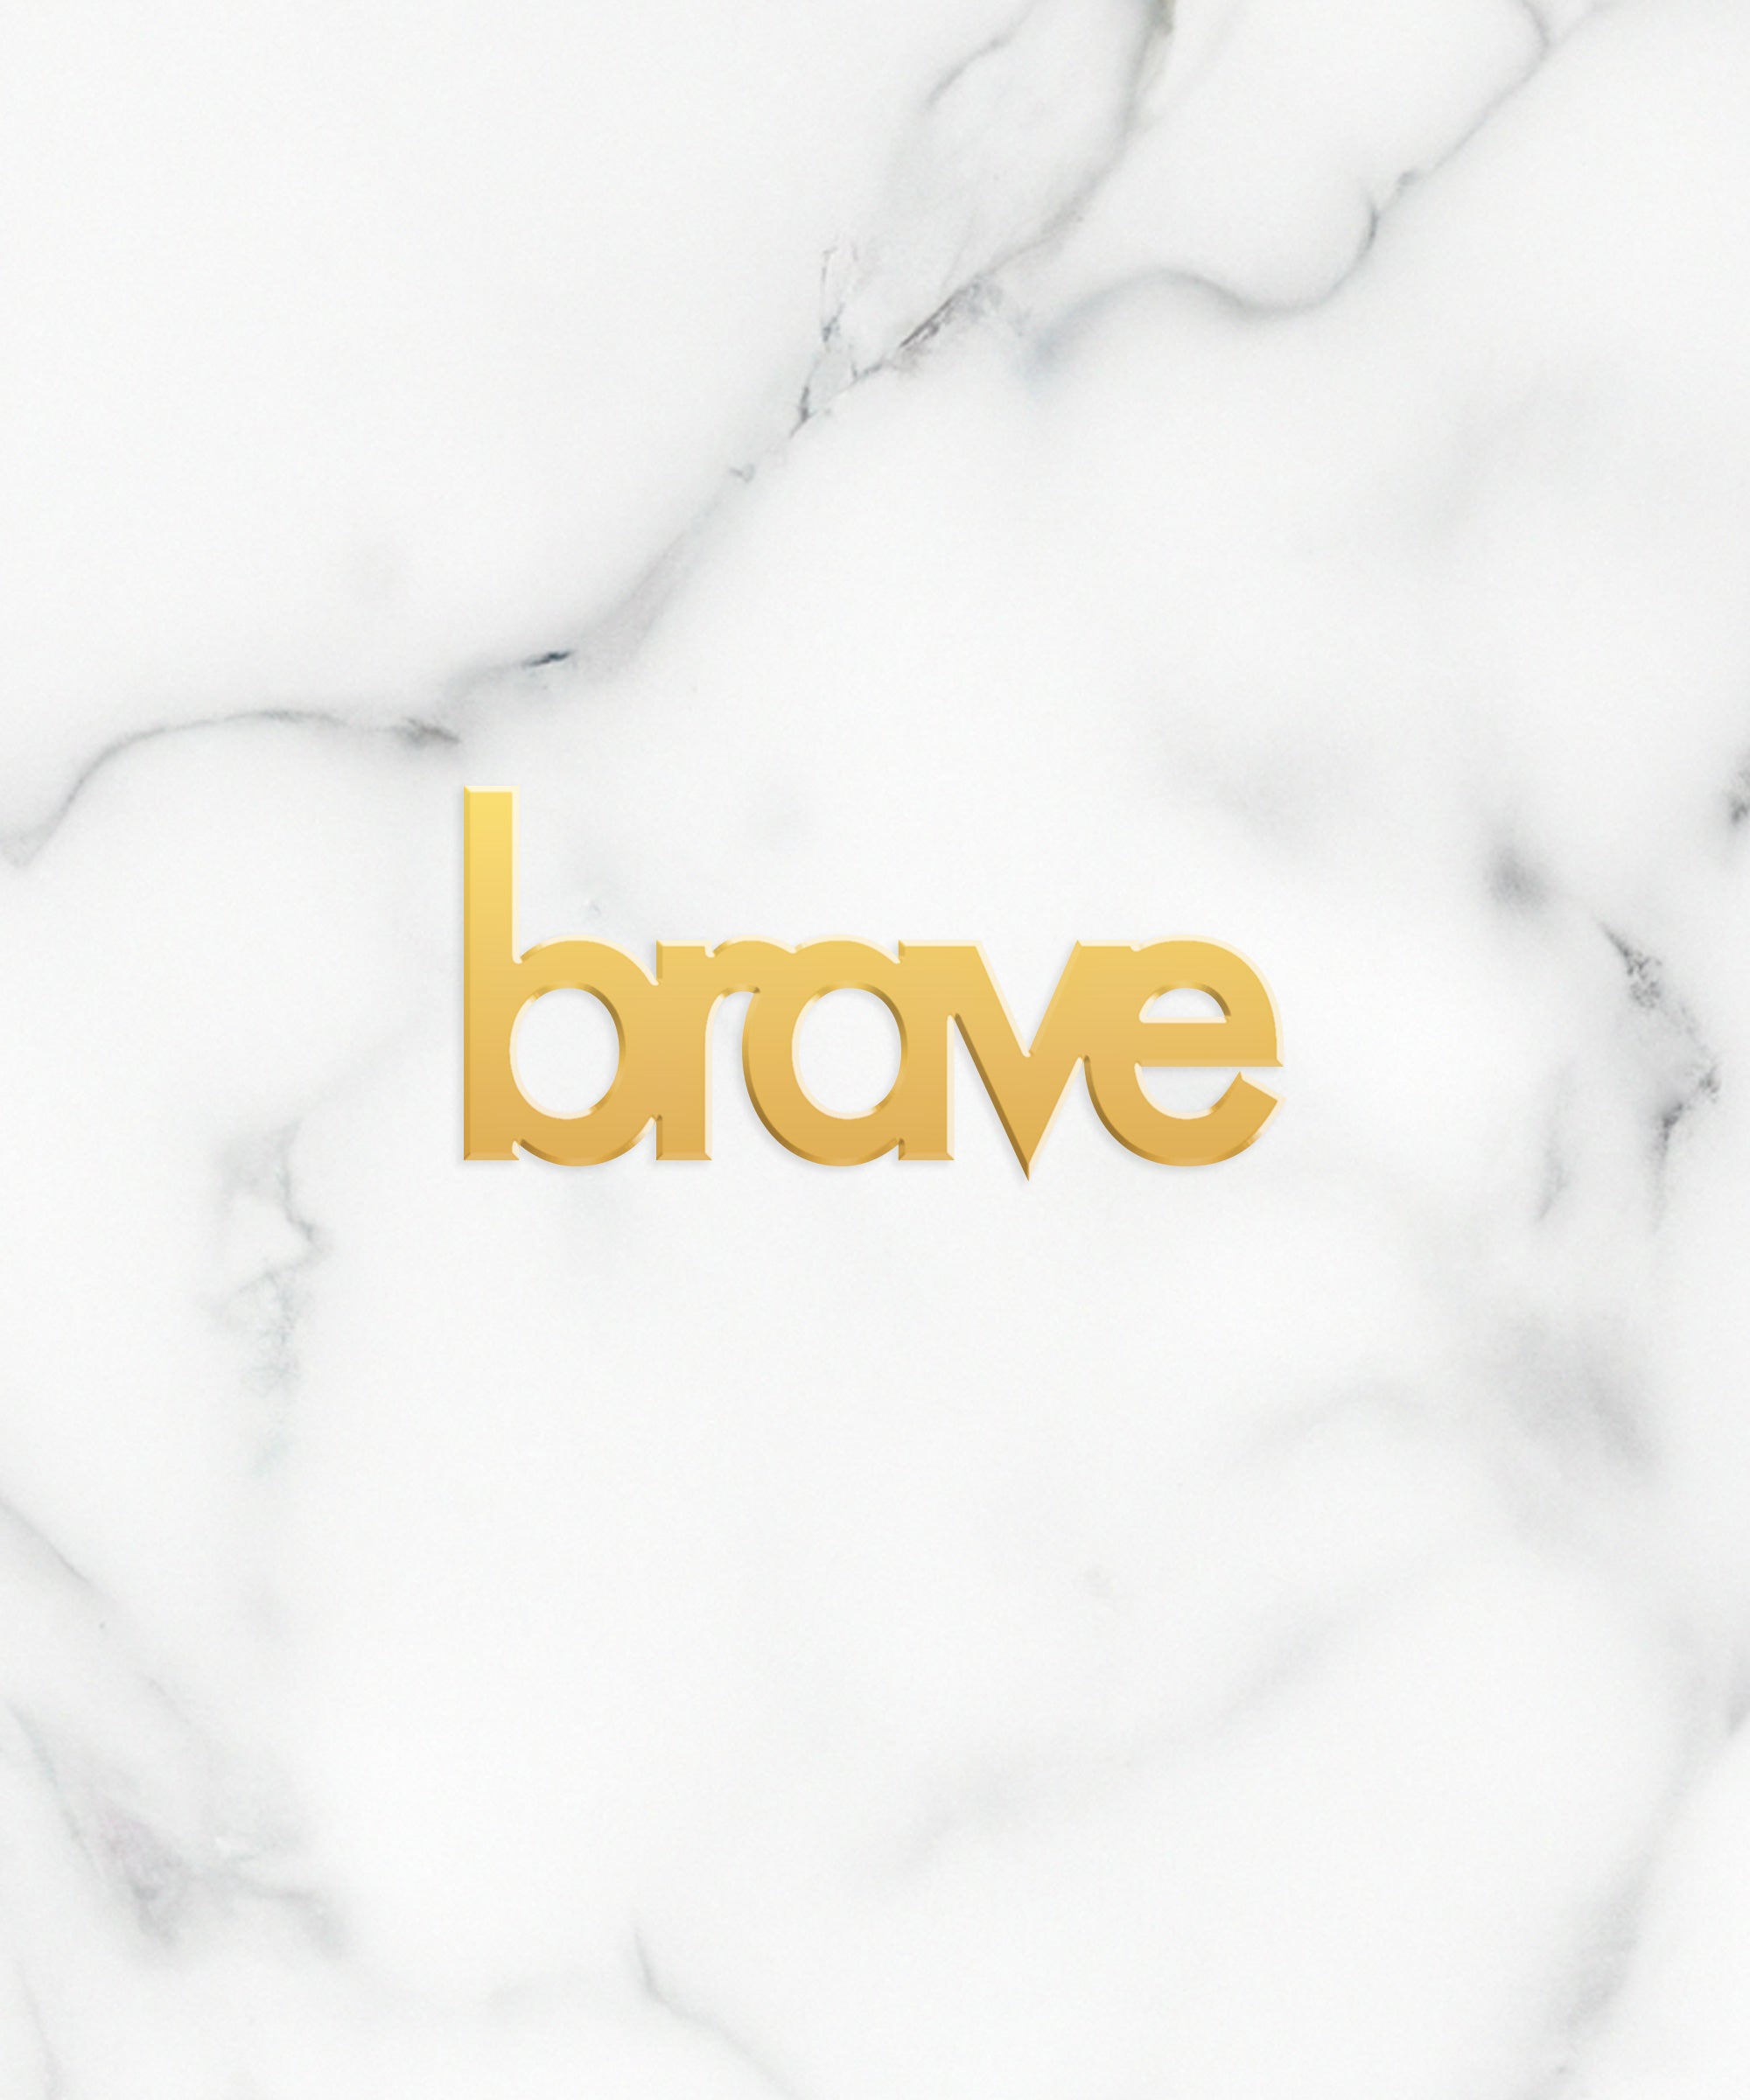 Brave Word Charm - High Quality, Affordable, Empowering, Self Love, Mantra Individual Charm for a Custom Locket - Available in Gold and Silver - Made in USA - Brevity Jewelry